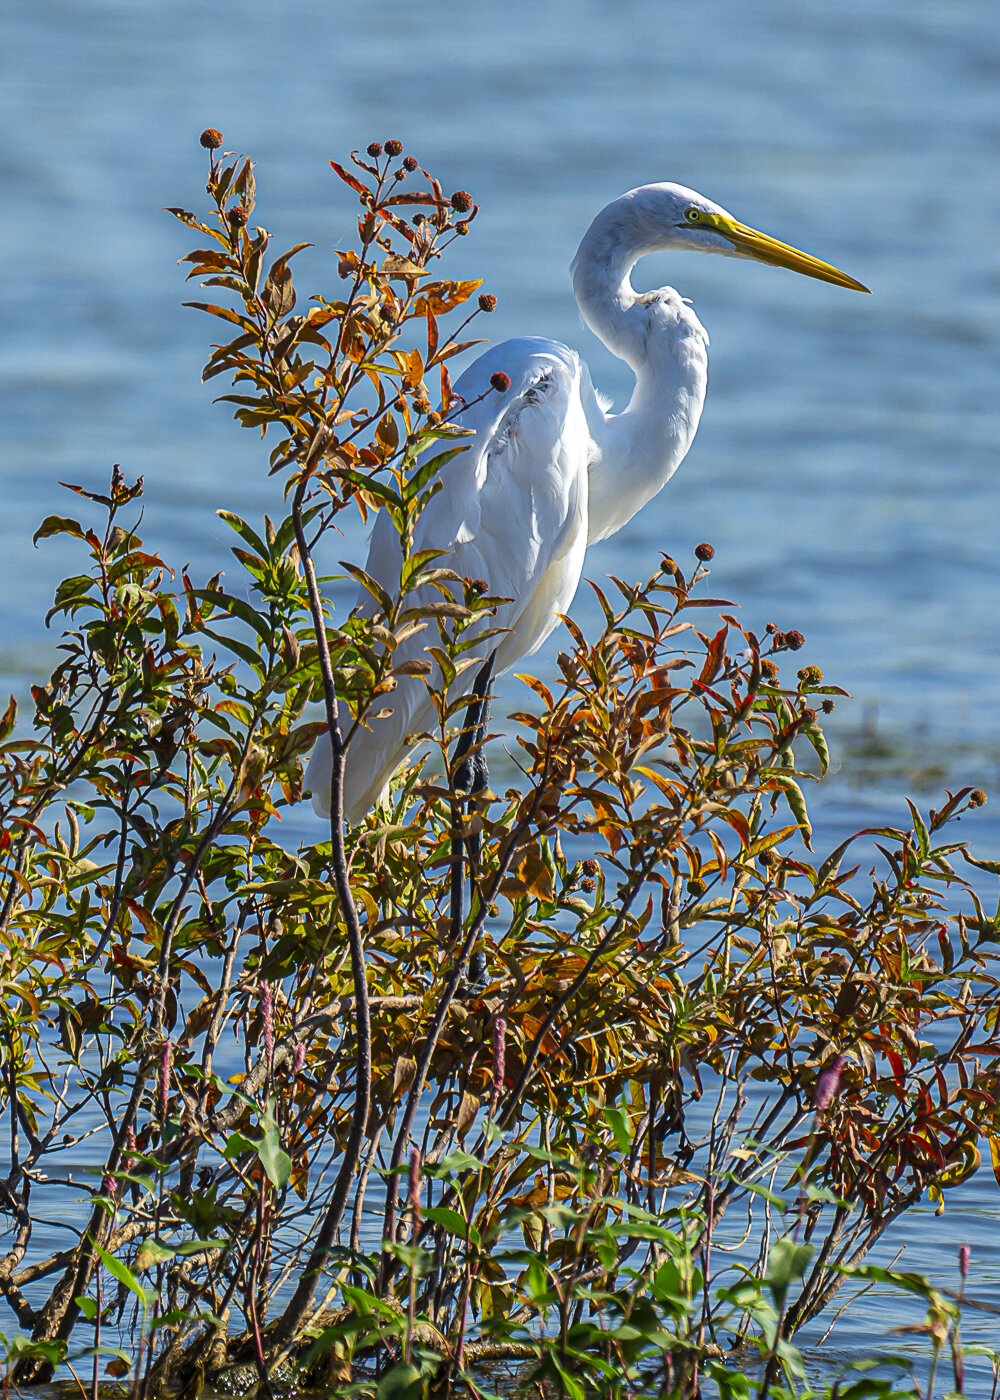 Great White Egret in Fall Foliage